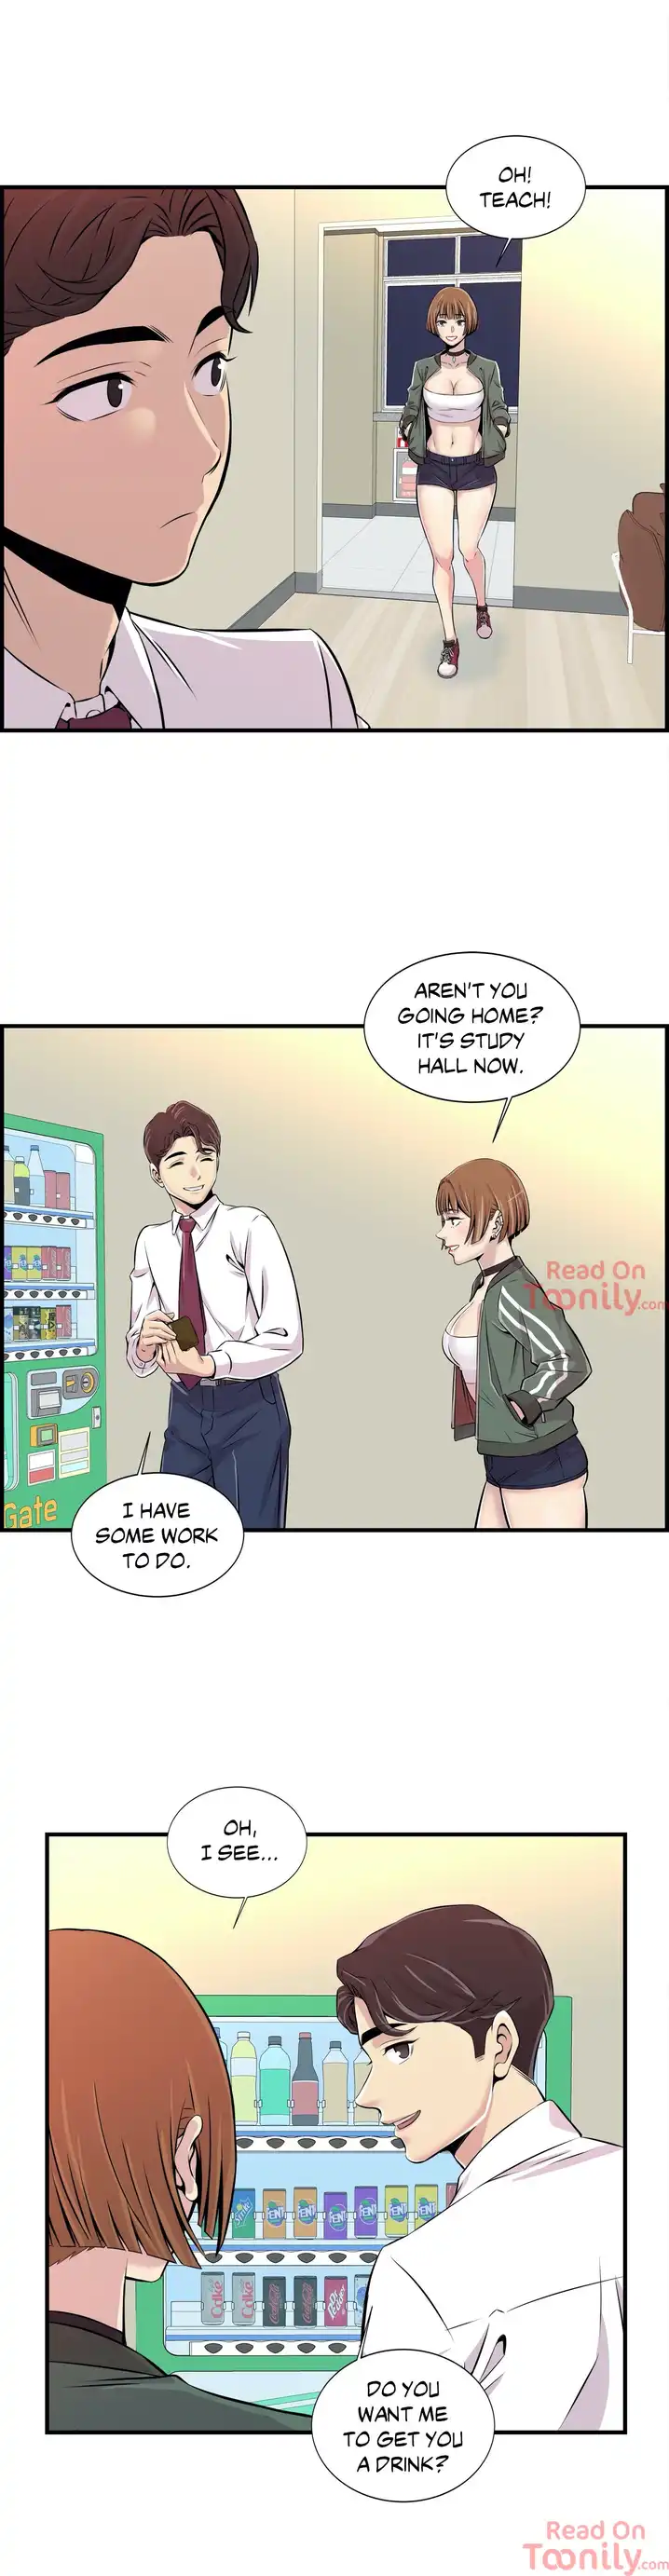 Cram School Scandal - Chapter 2 Page 20